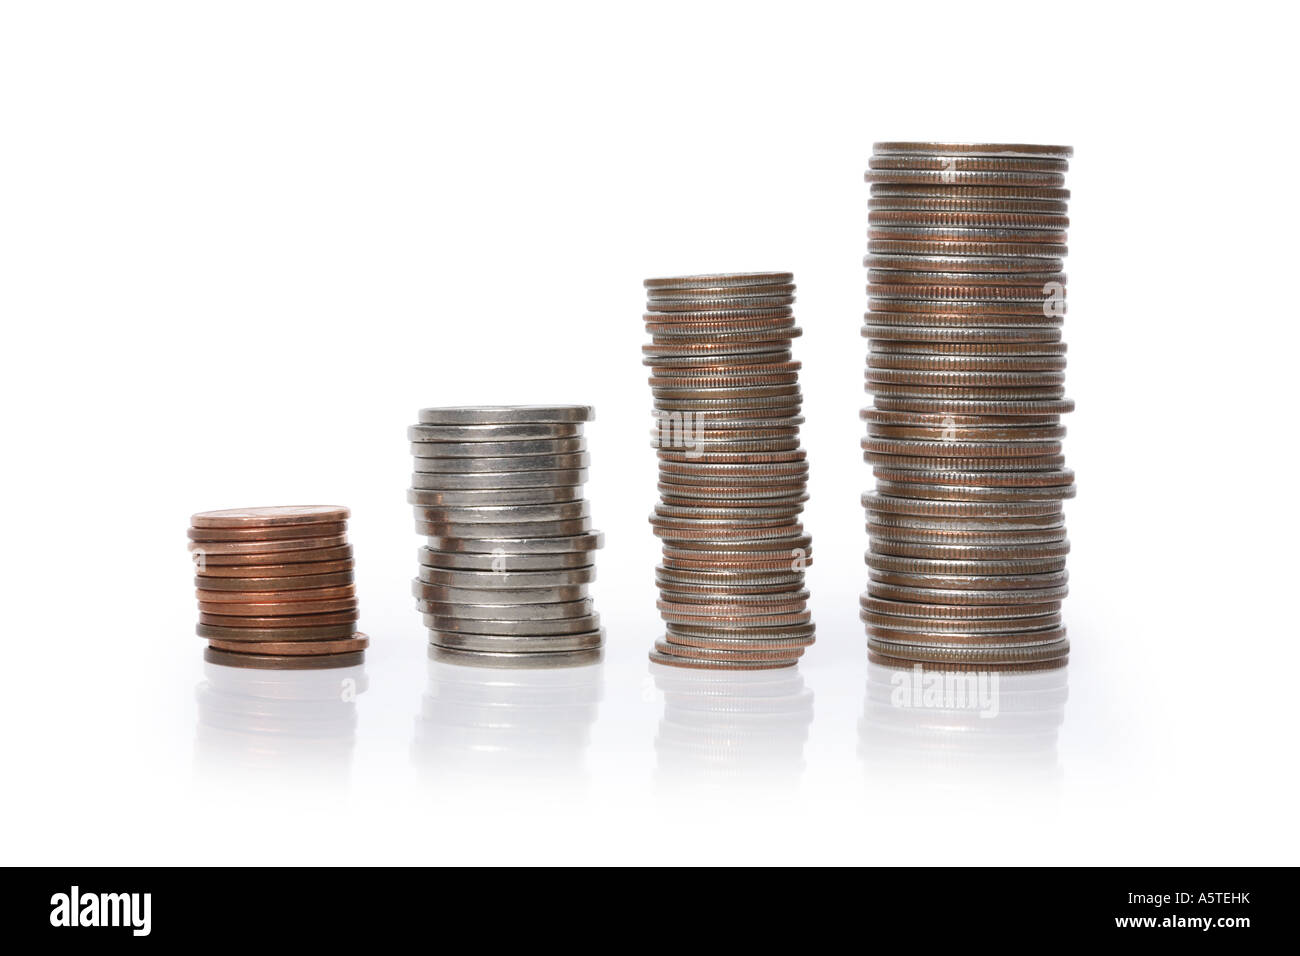 Stacks of Coins cut out on white background Stock Photo